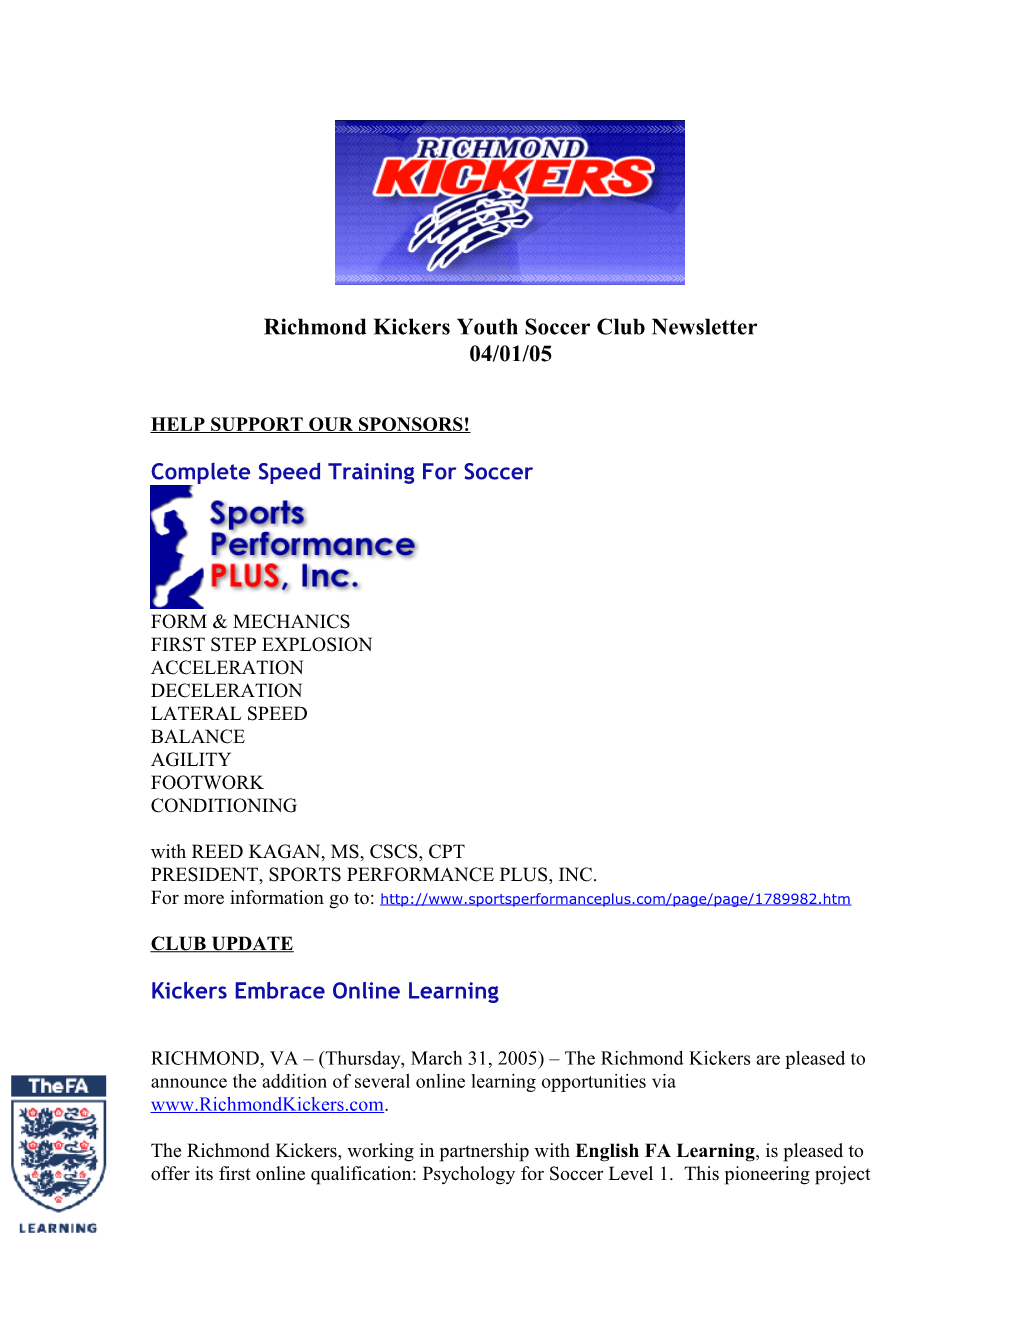 Richmond Kickers Youth Soccer Club Newsletter s2